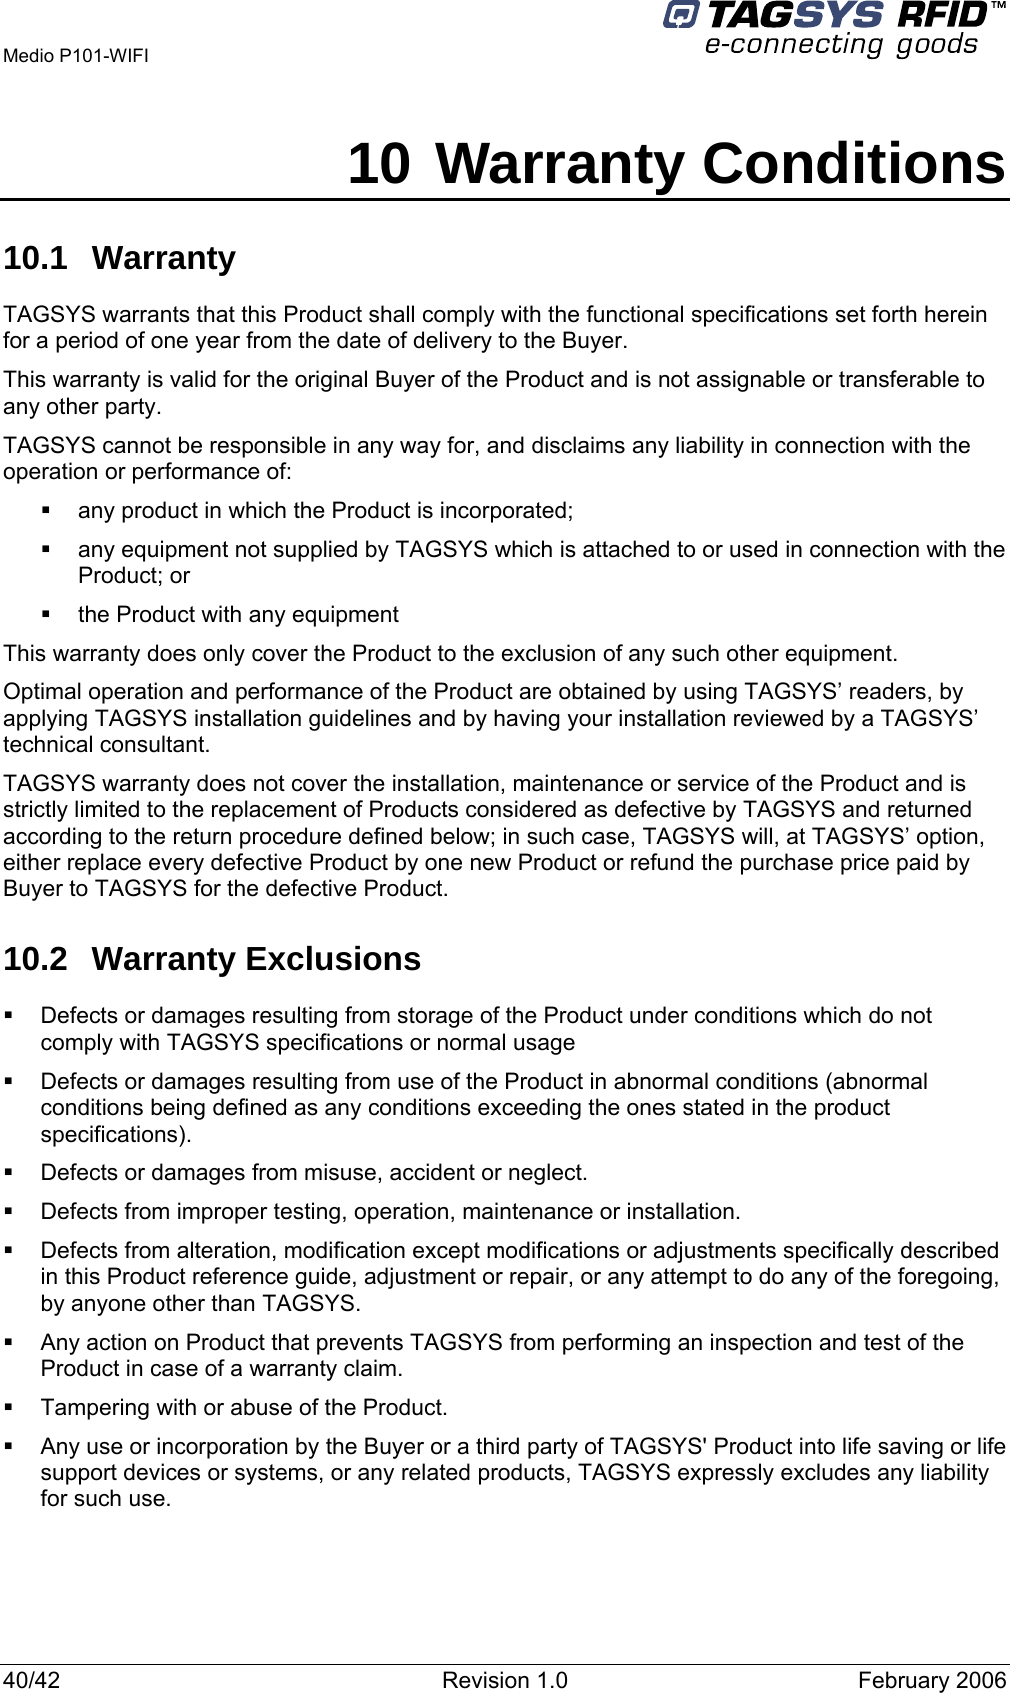  Medio P101-WIFI 40/42  Revision 1.0  February 2006 10 Warranty Conditions 10.1 Warranty TAGSYS warrants that this Product shall comply with the functional specifications set forth herein for a period of one year from the date of delivery to the Buyer. This warranty is valid for the original Buyer of the Product and is not assignable or transferable to any other party. TAGSYS cannot be responsible in any way for, and disclaims any liability in connection with the operation or performance of:   any product in which the Product is incorporated;   any equipment not supplied by TAGSYS which is attached to or used in connection with the Product; or   the Product with any equipment This warranty does only cover the Product to the exclusion of any such other equipment. Optimal operation and performance of the Product are obtained by using TAGSYS’ readers, by applying TAGSYS installation guidelines and by having your installation reviewed by a TAGSYS’ technical consultant. TAGSYS warranty does not cover the installation, maintenance or service of the Product and is strictly limited to the replacement of Products considered as defective by TAGSYS and returned according to the return procedure defined below; in such case, TAGSYS will, at TAGSYS’ option, either replace every defective Product by one new Product or refund the purchase price paid by Buyer to TAGSYS for the defective Product. 10.2 Warranty Exclusions   Defects or damages resulting from storage of the Product under conditions which do not comply with TAGSYS specifications or normal usage   Defects or damages resulting from use of the Product in abnormal conditions (abnormal conditions being defined as any conditions exceeding the ones stated in the product specifications).   Defects or damages from misuse, accident or neglect.   Defects from improper testing, operation, maintenance or installation.   Defects from alteration, modification except modifications or adjustments specifically described in this Product reference guide, adjustment or repair, or any attempt to do any of the foregoing, by anyone other than TAGSYS.   Any action on Product that prevents TAGSYS from performing an inspection and test of the Product in case of a warranty claim.   Tampering with or abuse of the Product.   Any use or incorporation by the Buyer or a third party of TAGSYS&apos; Product into life saving or life support devices or systems, or any related products, TAGSYS expressly excludes any liability for such use. 